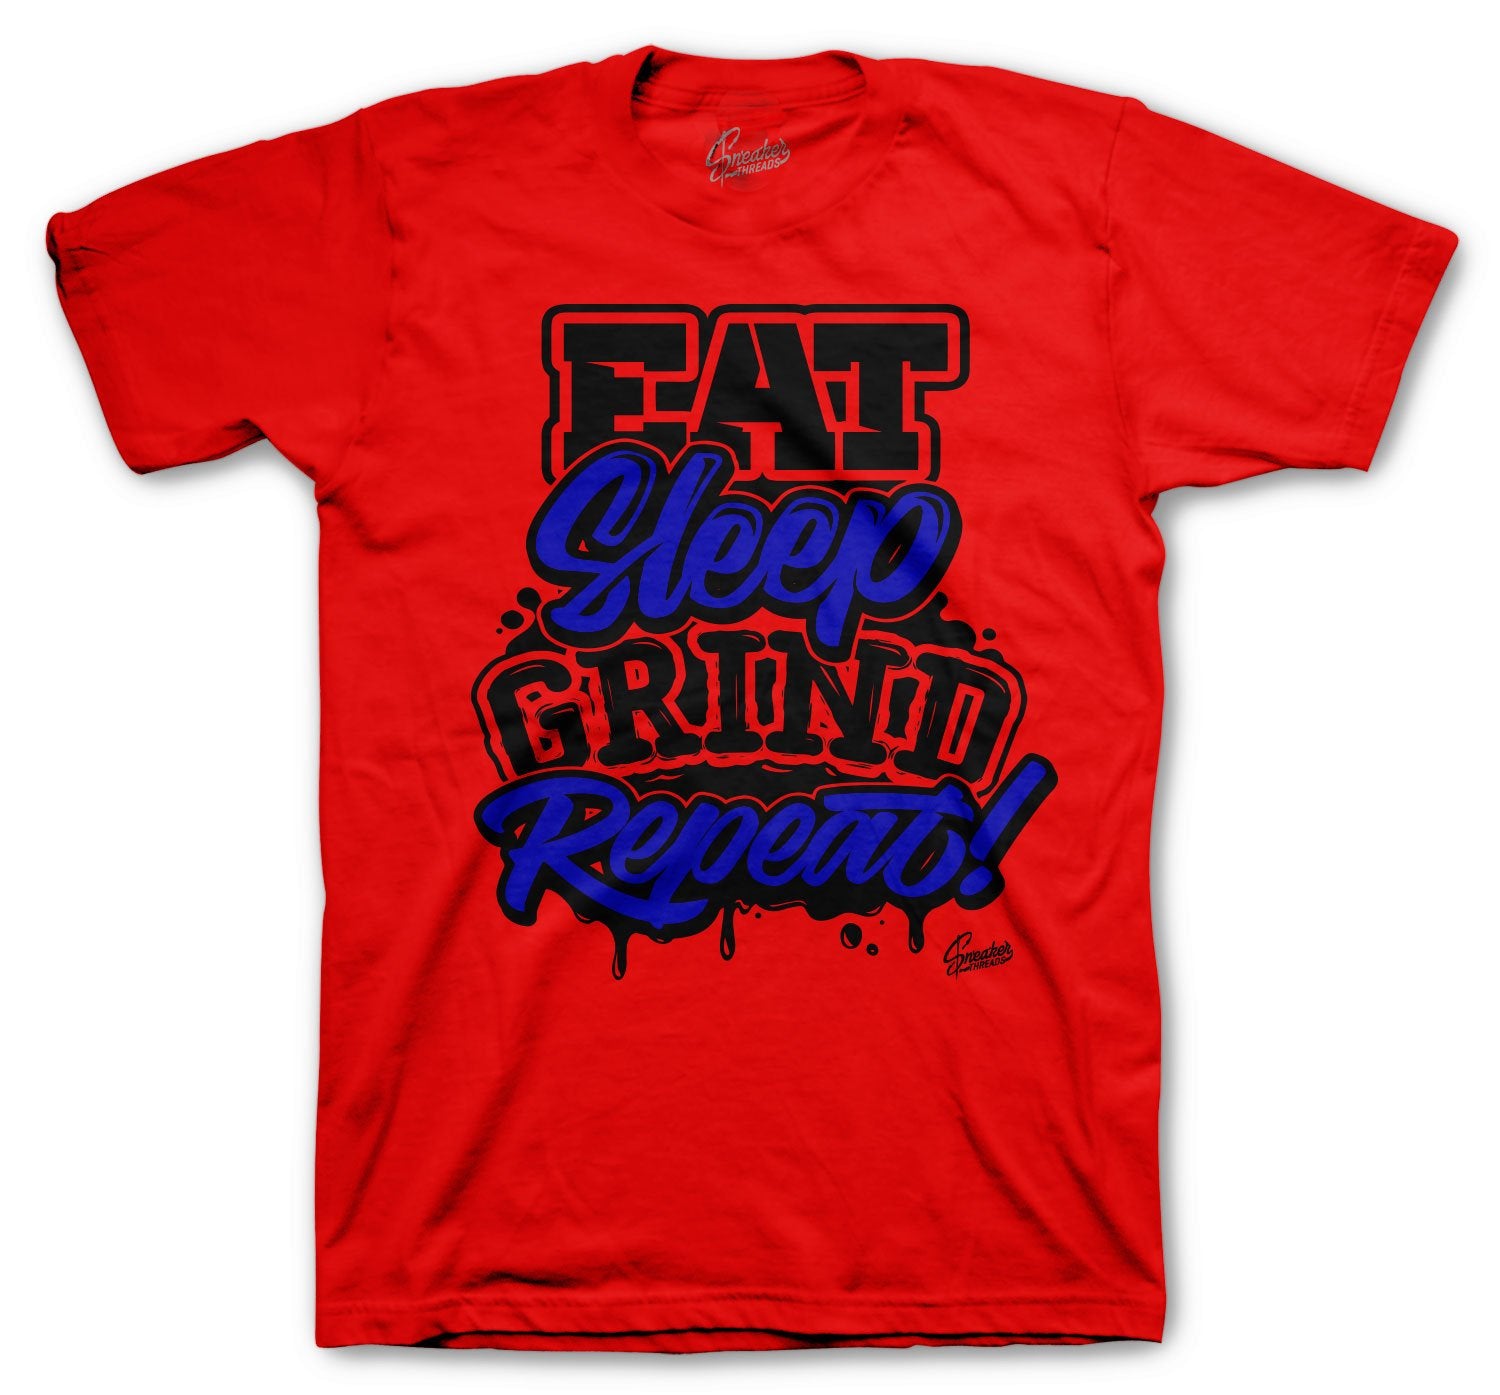 red and blue tshirt